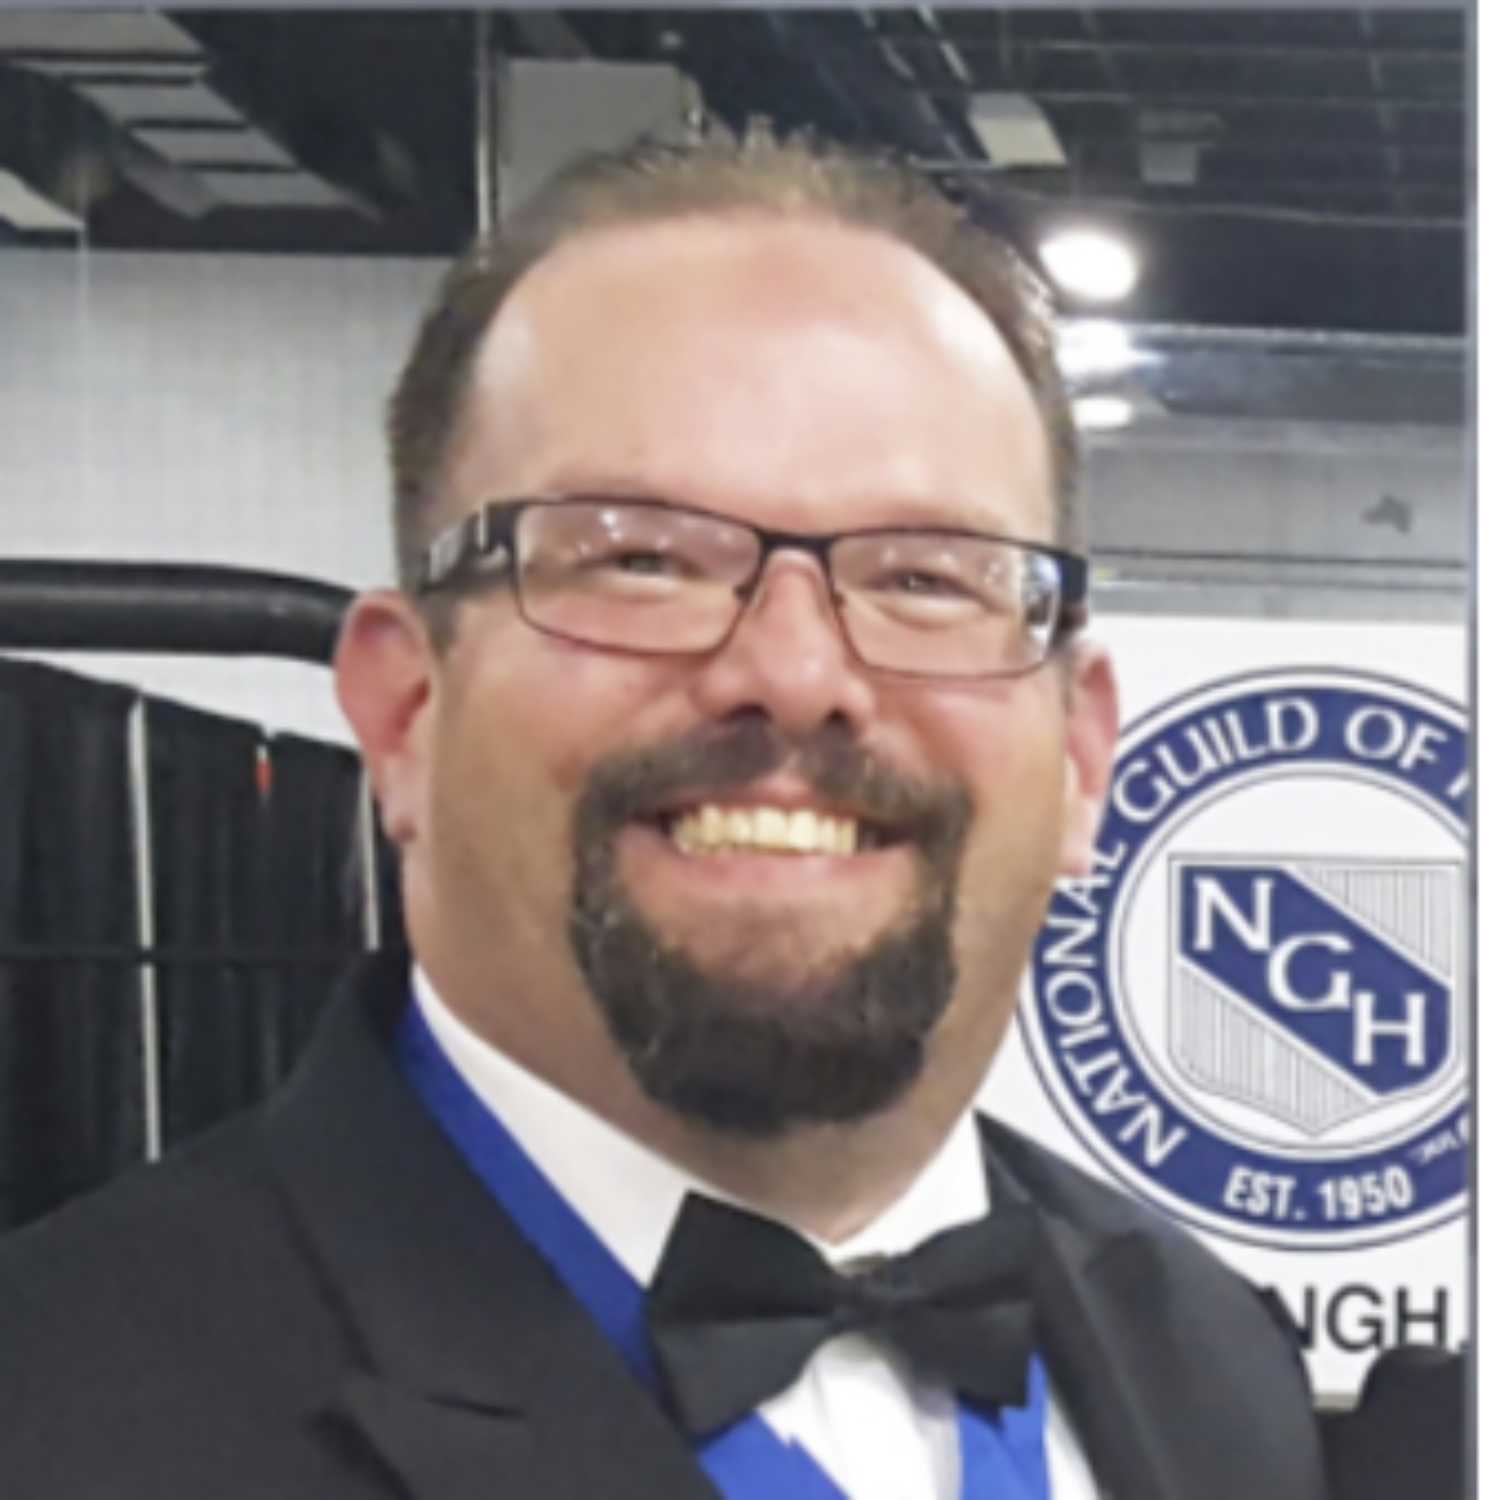 Jereme Bachand NGH Executive Director - Convention 2023